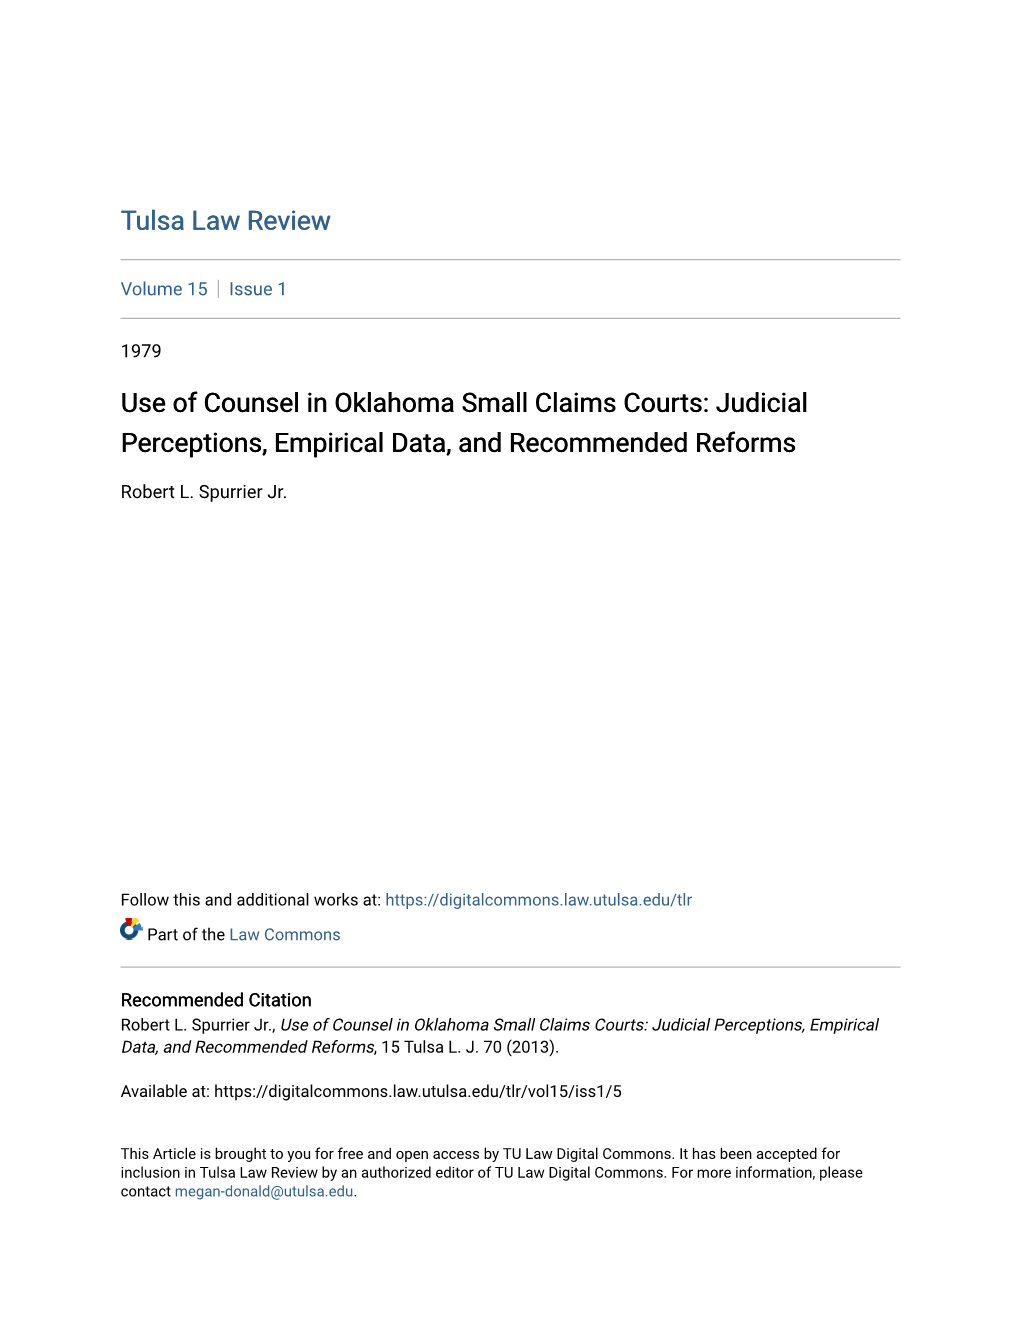 Use of Counsel in Oklahoma Small Claims Courts: Judicial Perceptions, Empirical Data, and Recommended Reforms